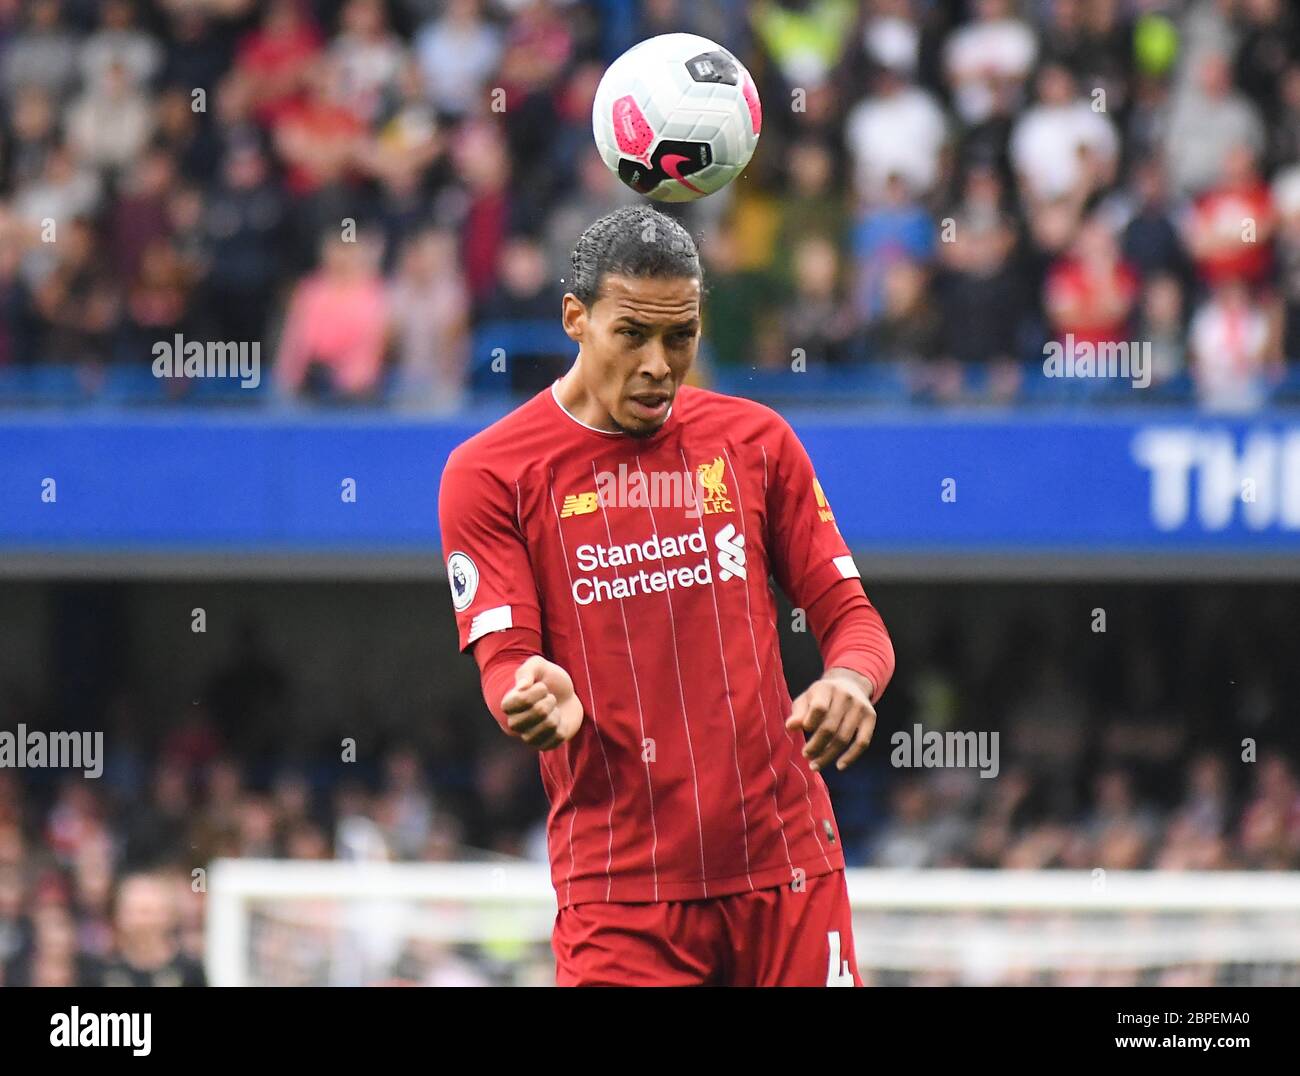 LONDON, ENGLAND - SEPTEMBER 22, 2019: Virgil van Dijk of Liverpool pictured during the 2019/20 Premier League game between Chelsea FC and Liverpool FC at Stamford Bridge. Stock Photo